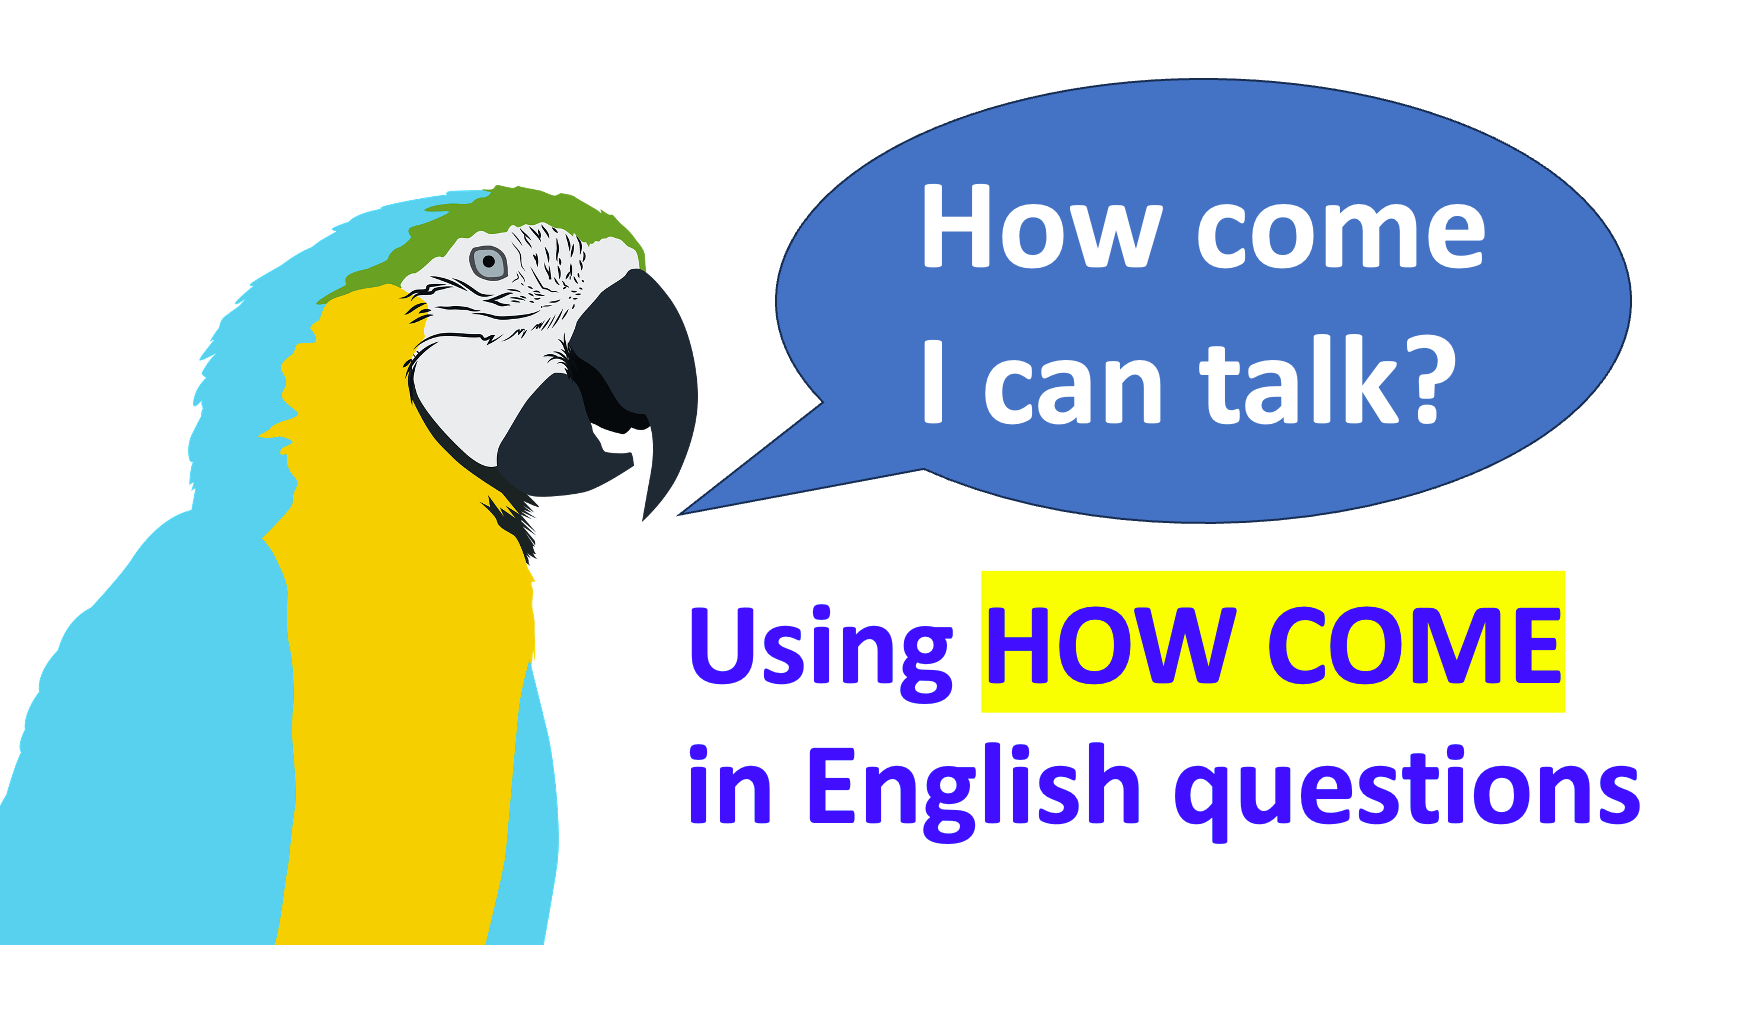 Using how come in informal English questions